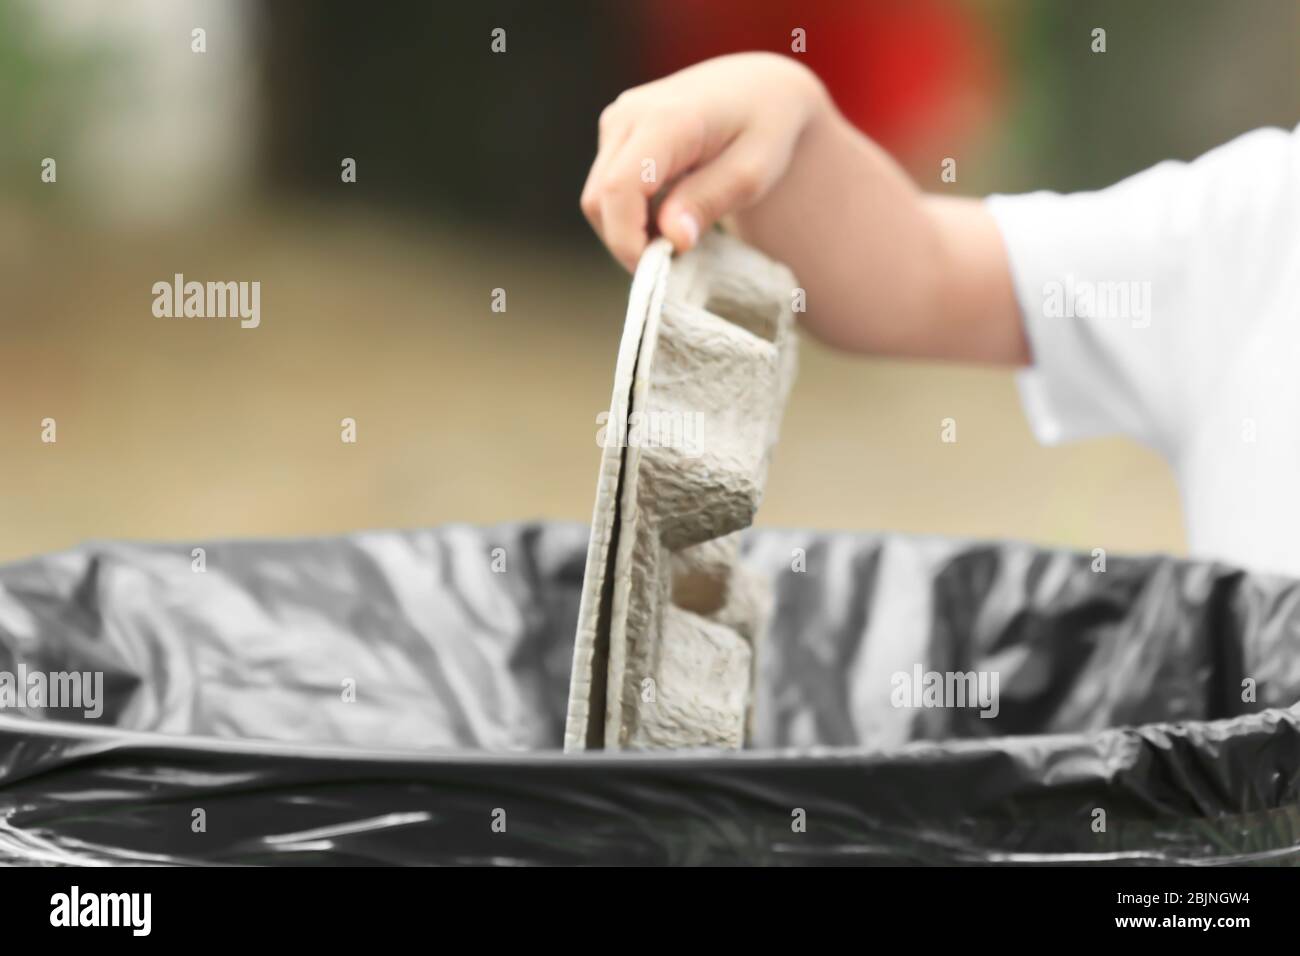 Hand of child throwing garbage into litter bin outdoors Stock Photo